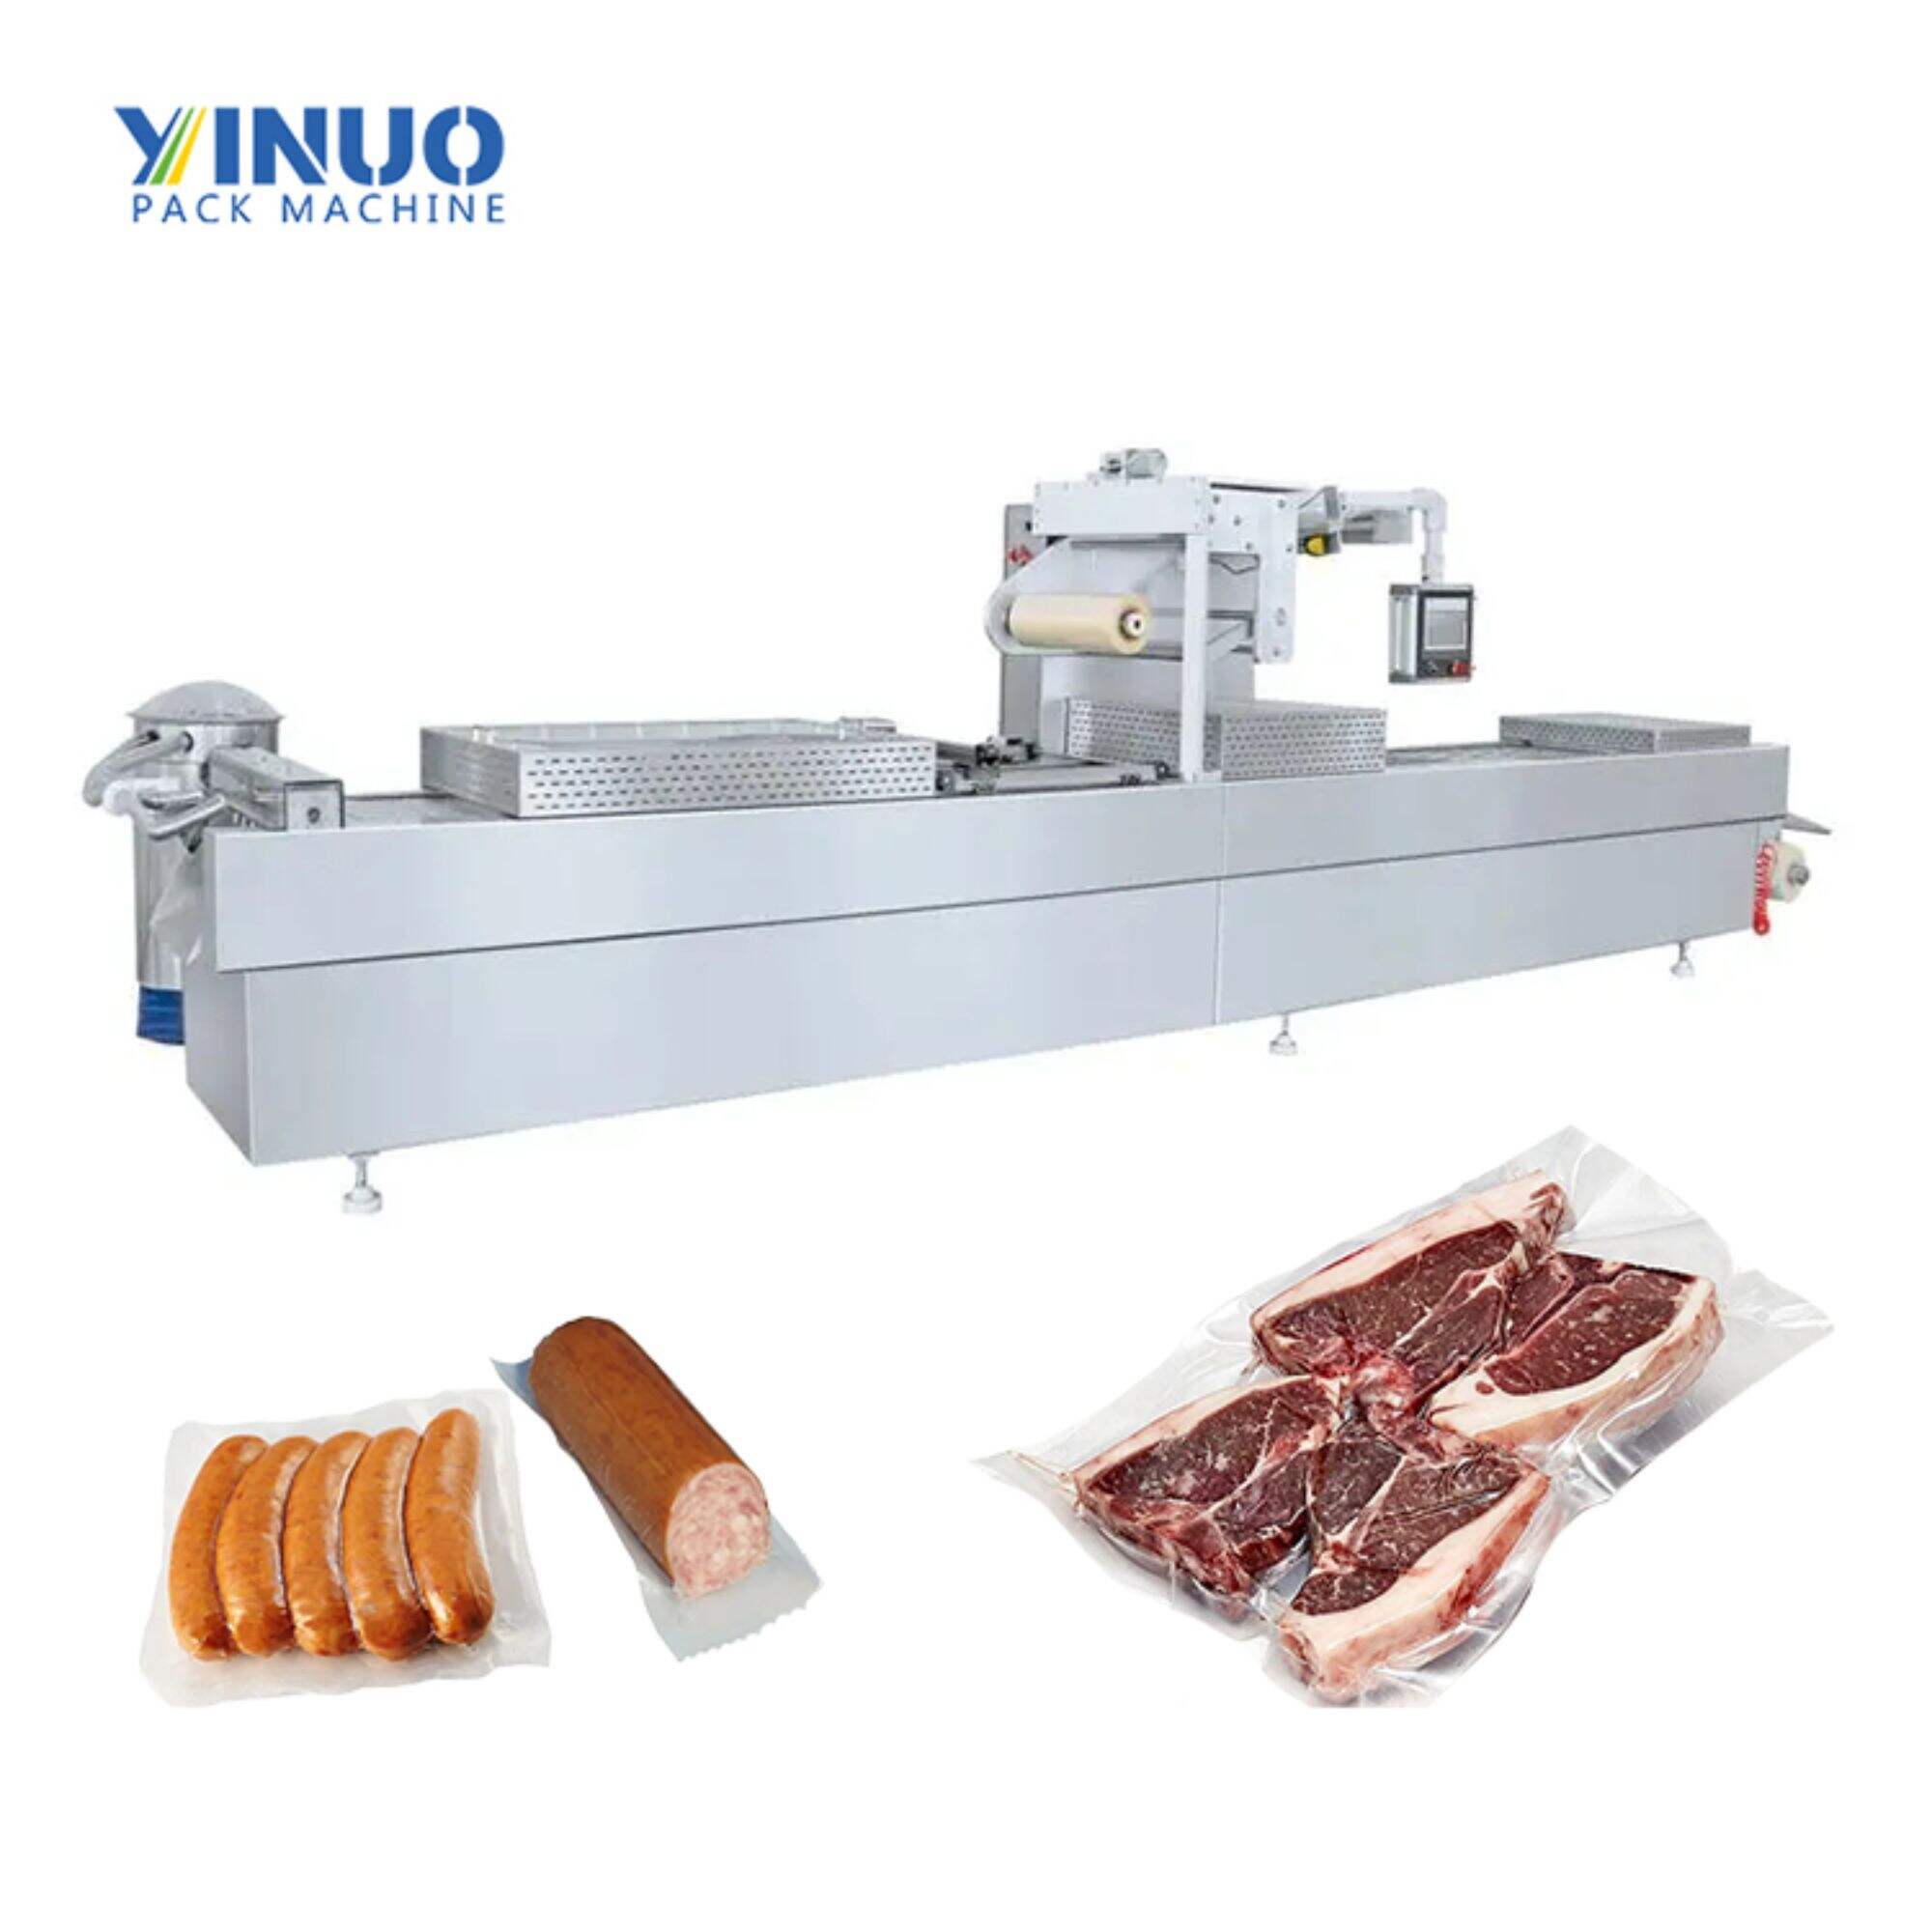 Fully Automatic Thermoforming Packaging Machine Is Suitable For Meat, Aquatic Fish, Vegetables, Nuts, Etc.